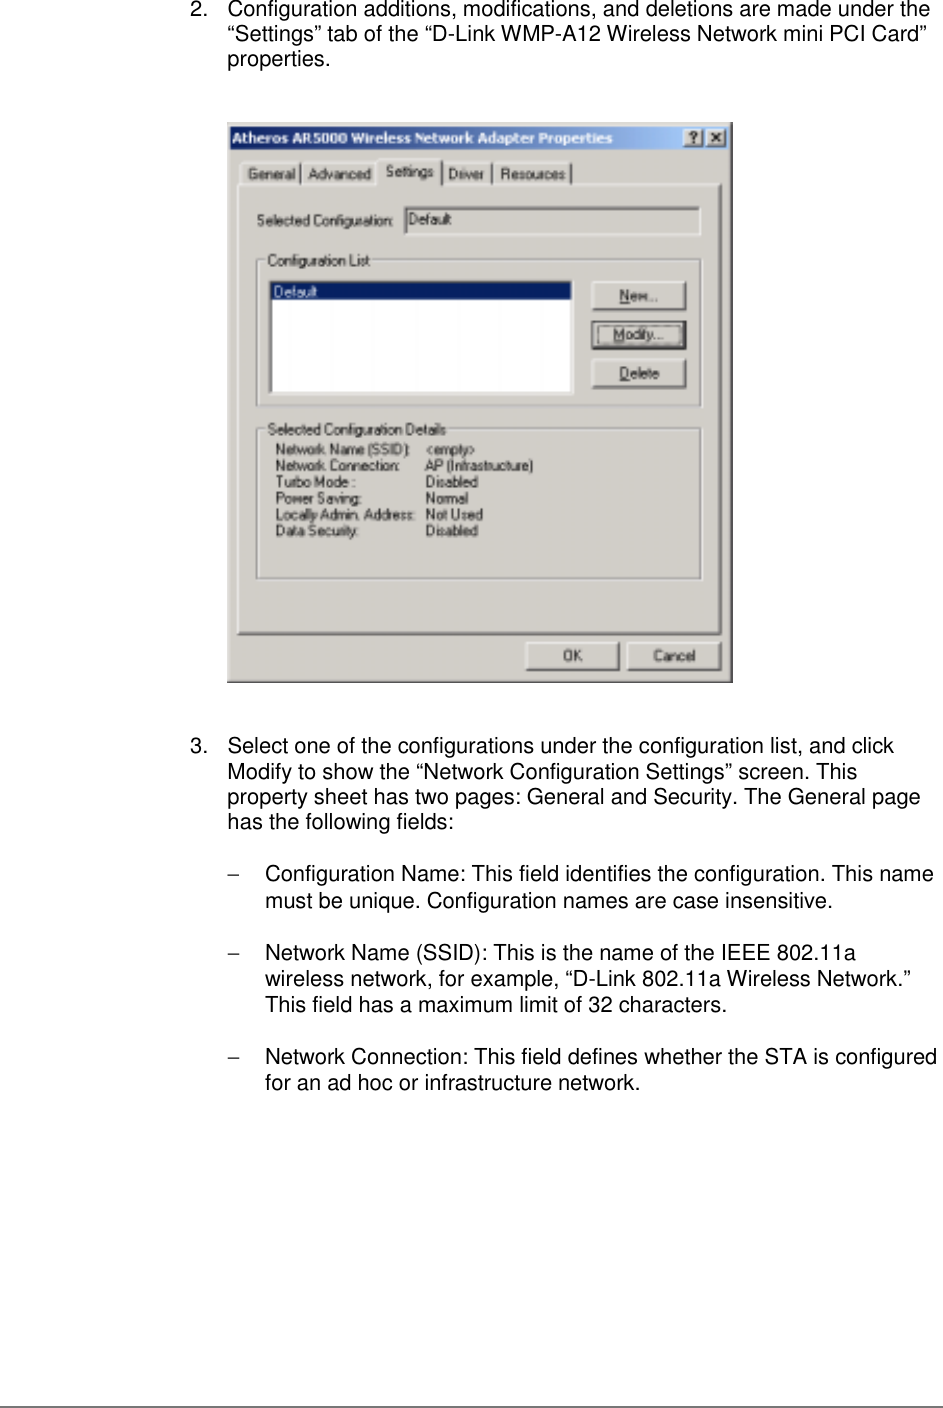 2.  Configuration additions, modifications, and deletions are made under the“Settings” tab of the “D-Link WMP-A12 Wireless Network mini PCI Card”properties.3.  Select one of the configurations under the configuration list, and clickModify to show the “Network Configuration Settings” screen. Thisproperty sheet has two pages: General and Security. The General pagehas the following fields:−  Configuration Name: This field identifies the configuration. This namemust be unique. Configuration names are case insensitive.−  Network Name (SSID): This is the name of the IEEE 802.11awireless network, for example, “D-Link 802.11a Wireless Network.”This field has a maximum limit of 32 characters.−  Network Connection: This field defines whether the STA is configuredfor an ad hoc or infrastructure network.